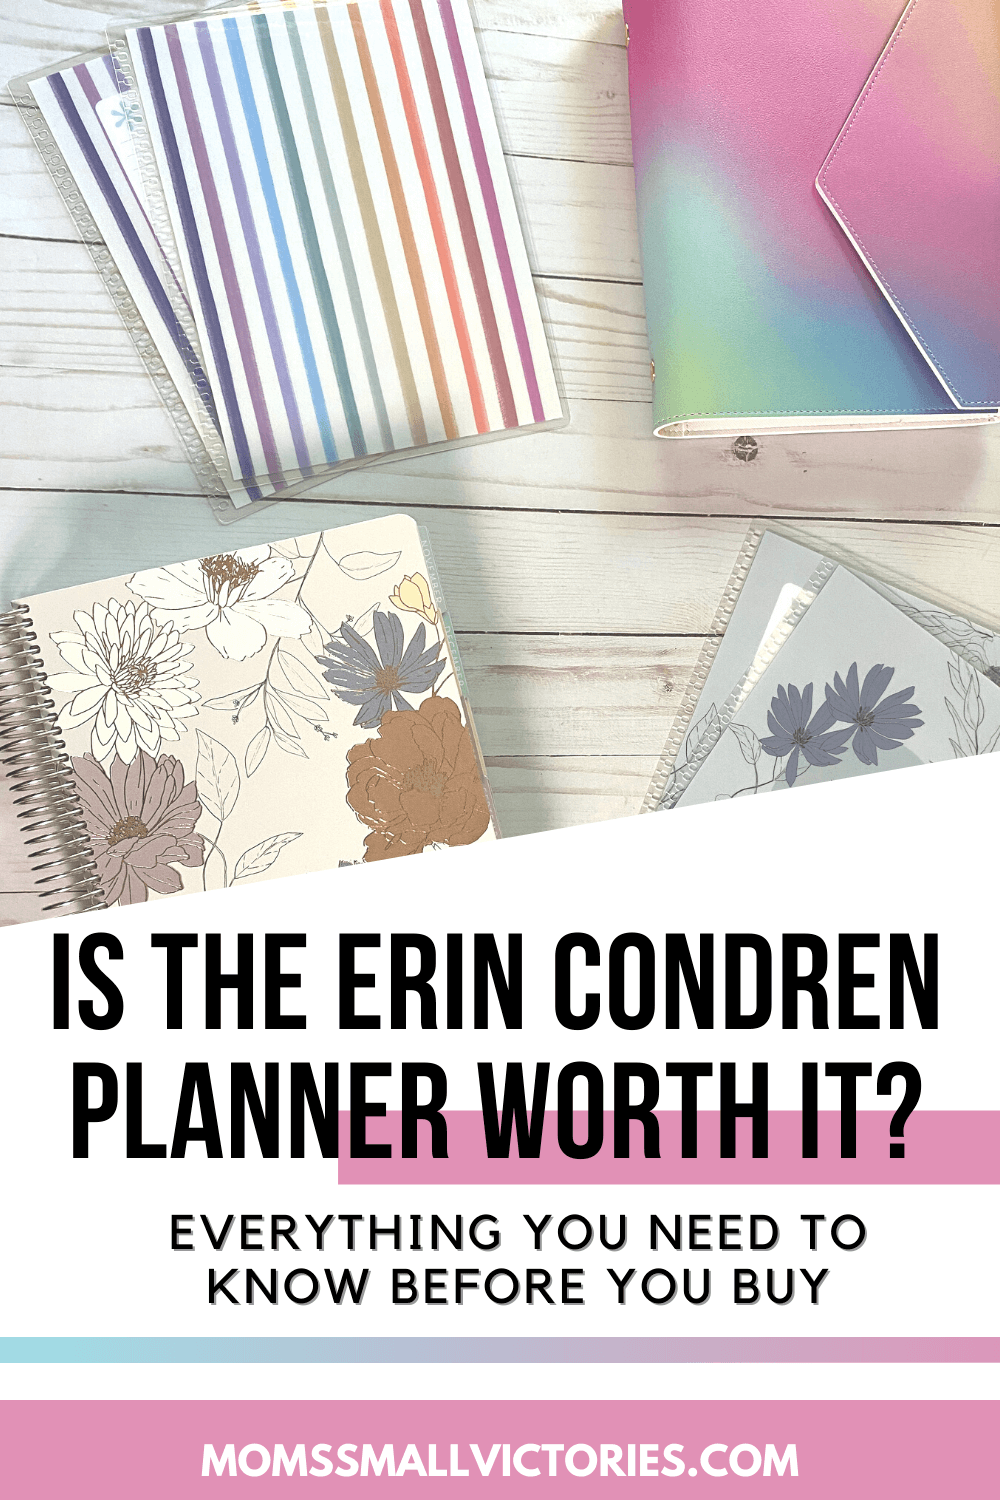 Is the Erin Condren planner worth it? What you need to know before you buy. Including Erin condren planner reviews, the best Erin condren planner for your needs, the best pens to use, changes for the new planners and more answers to your frequently asked questions. Pictured clockwise from top left: interchangeable snap in covers with watercolor stripe rainbow, a small A5 sized ring binder with a green, blue and purple soft vegan leather cover, two snap in blue floral covers and a pink In bloom floral cover on a platinum coil planner.